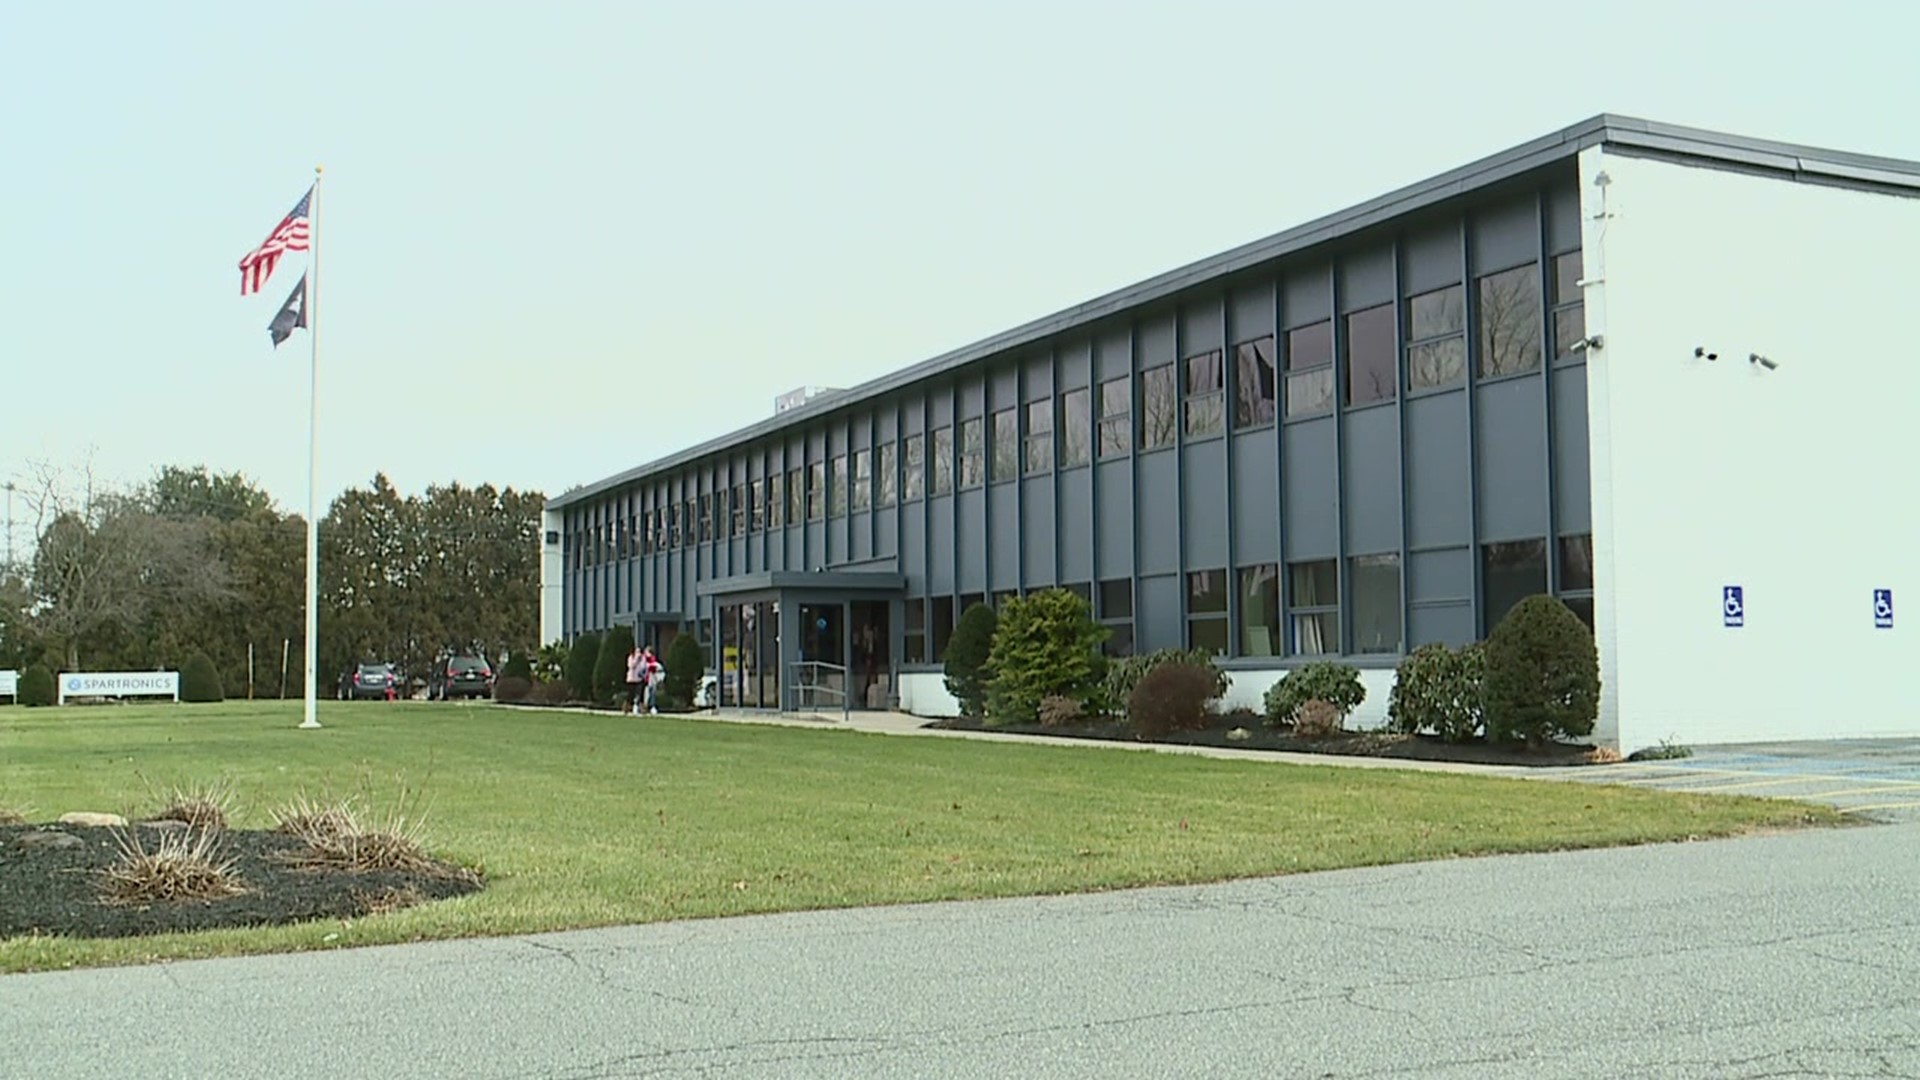 Spartronics Corporation is looking to add more employees at its headquarters in Williamsport.